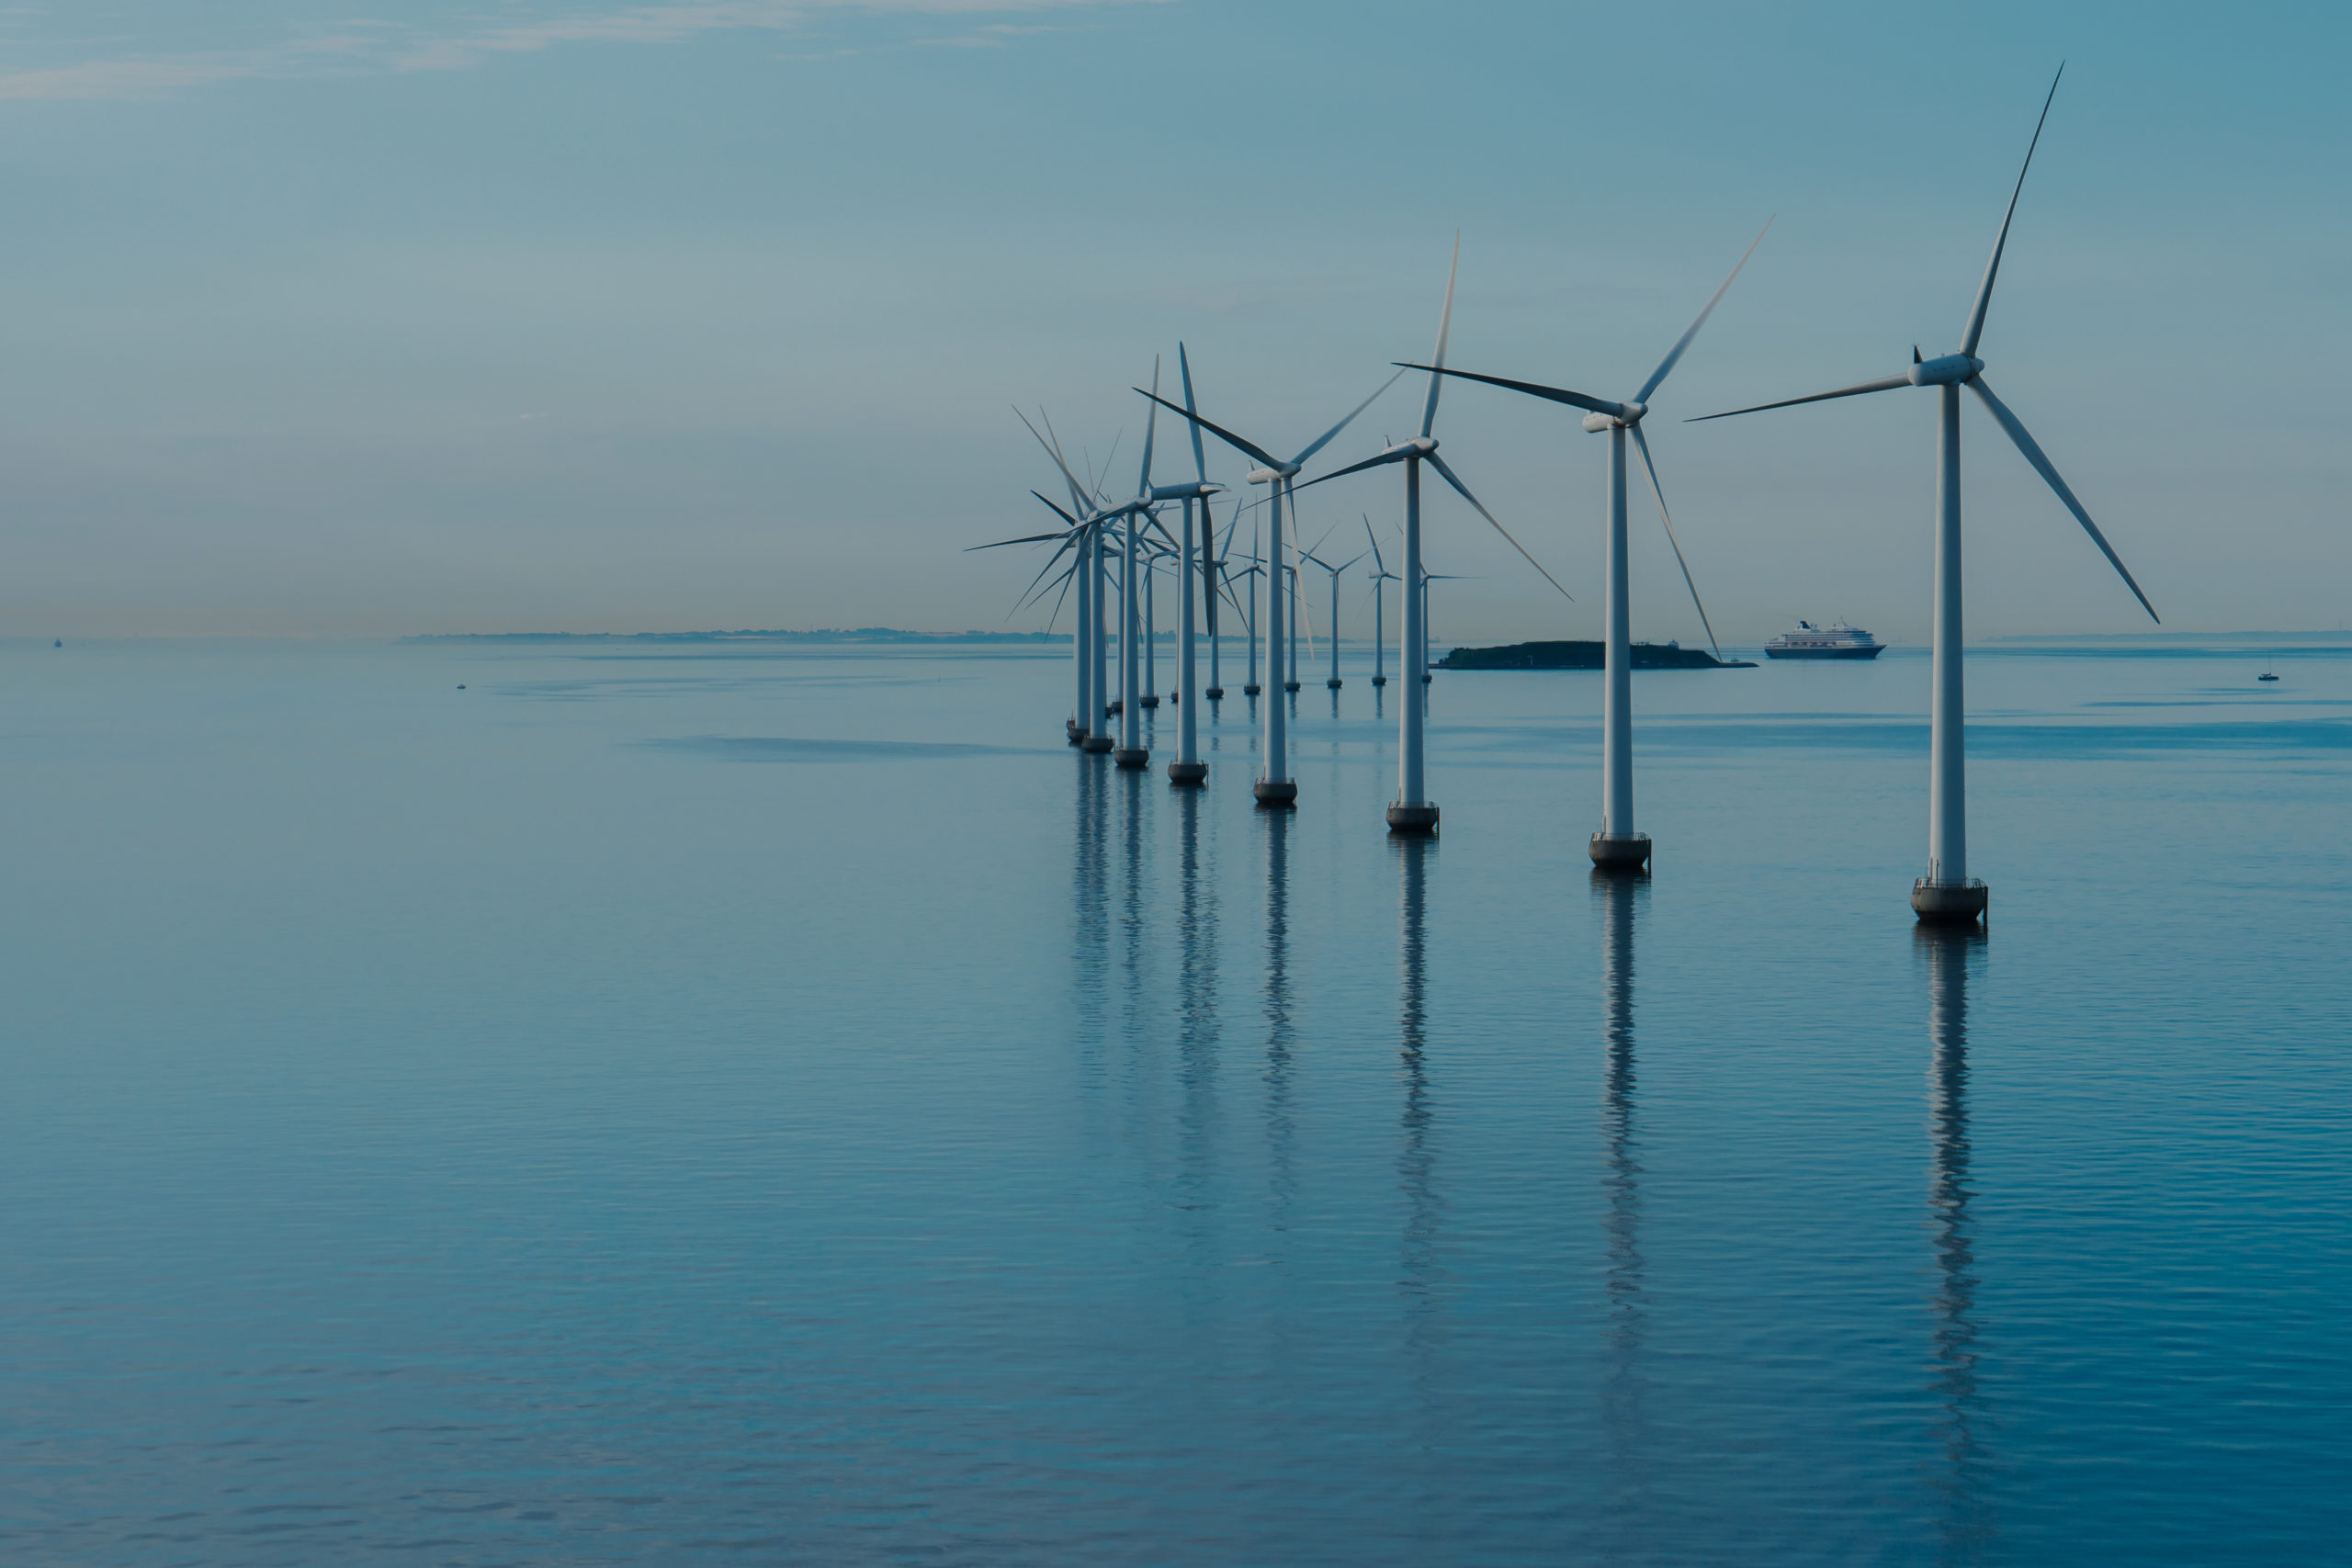 Anbaric Applauds Governor Murphy’s Offshore Wind Goal Announcement